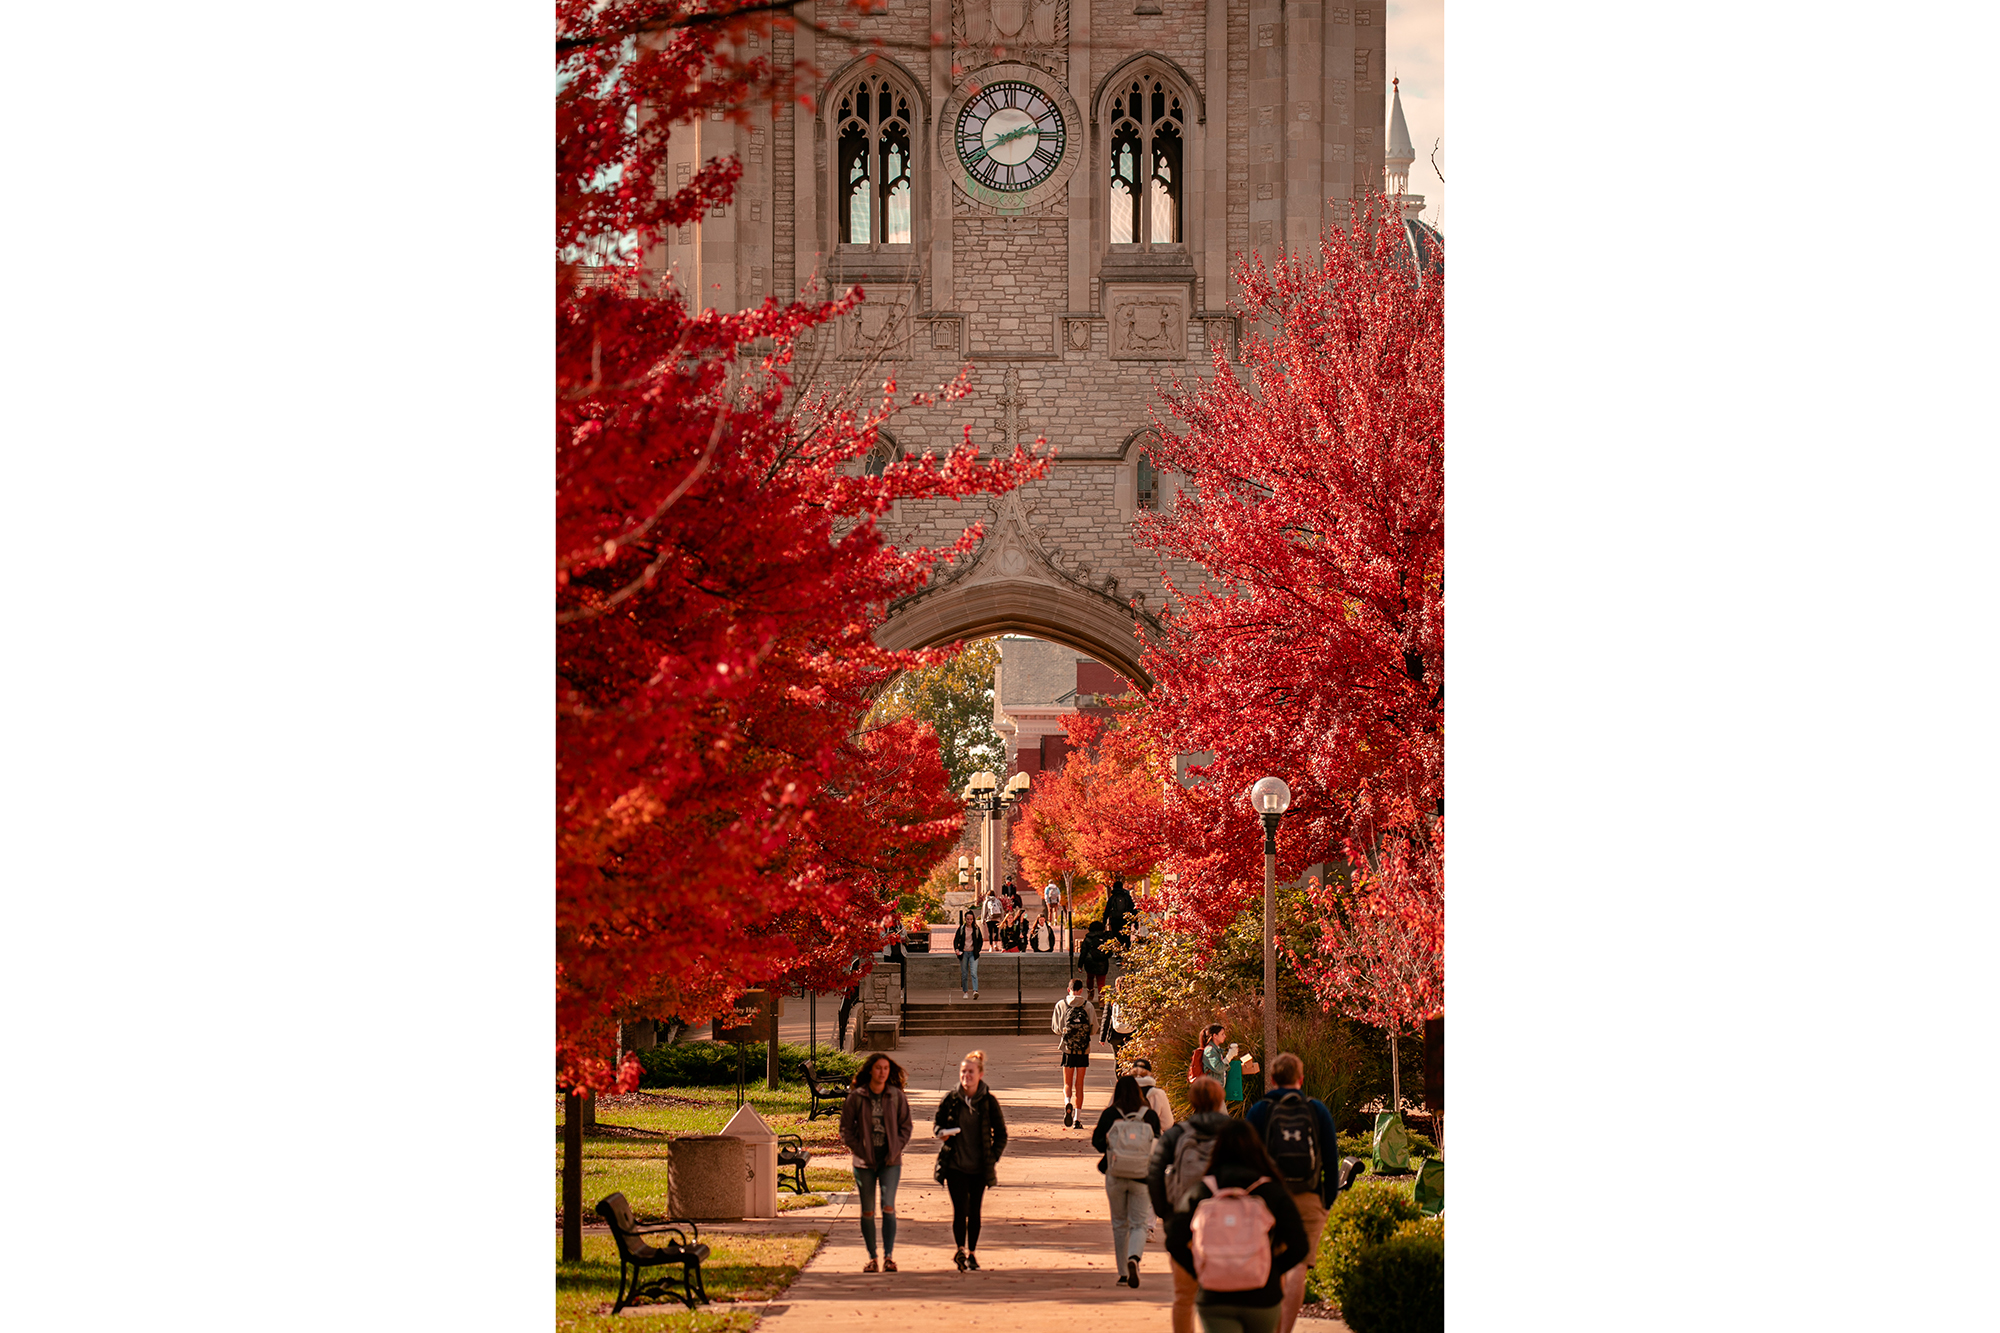 fall photo of memorial union tower and red trees with students walking in front